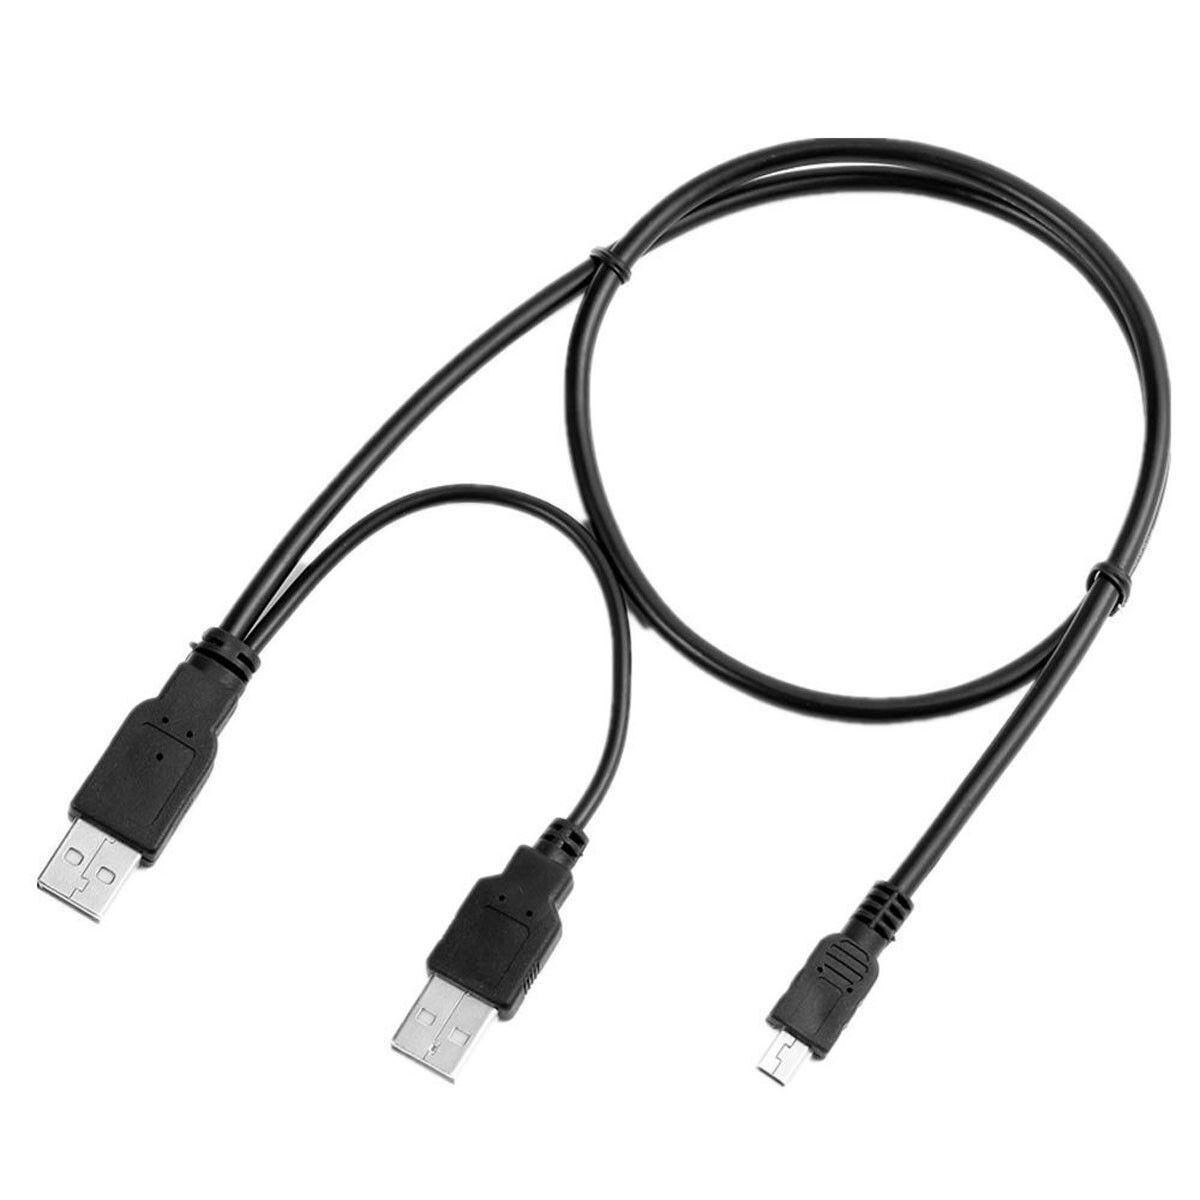 Primary image for Usb Y Power Charger+Data Sync Cable Cord For Garmin Edge 205 305 605 705 800 Gps